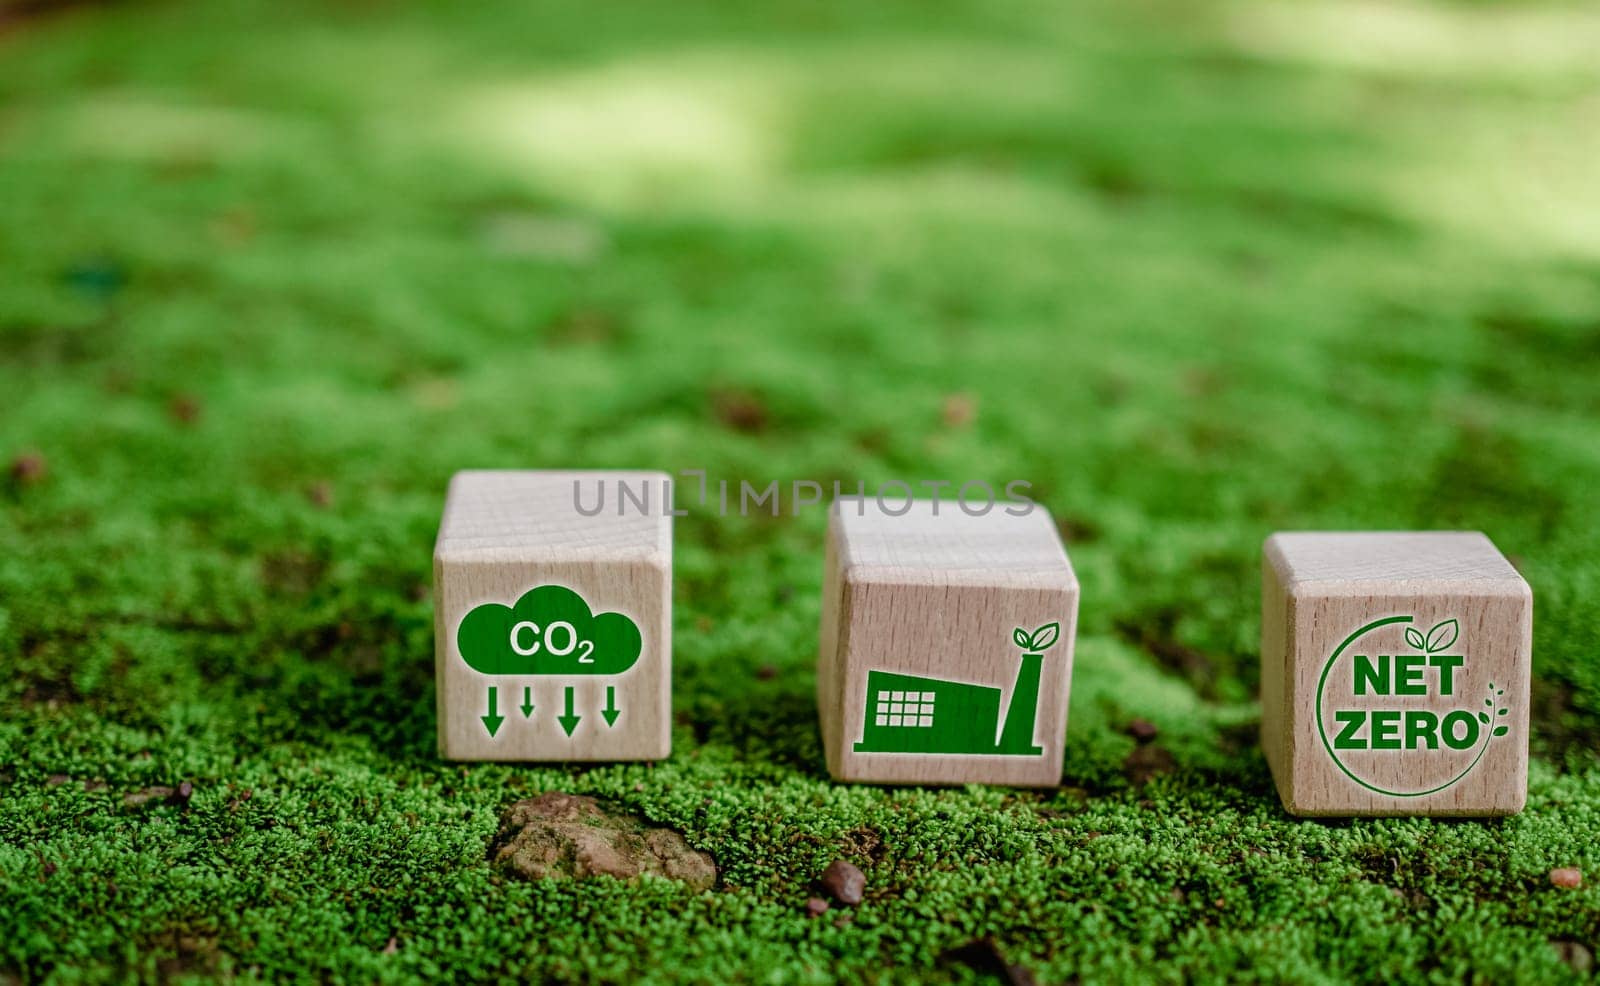 CO2 emission reduction concept, clean and friendly environment without carbon dioxide emissions. Planting trees to reduce CO2 emissions, environmental protection concept. by Unimages2527